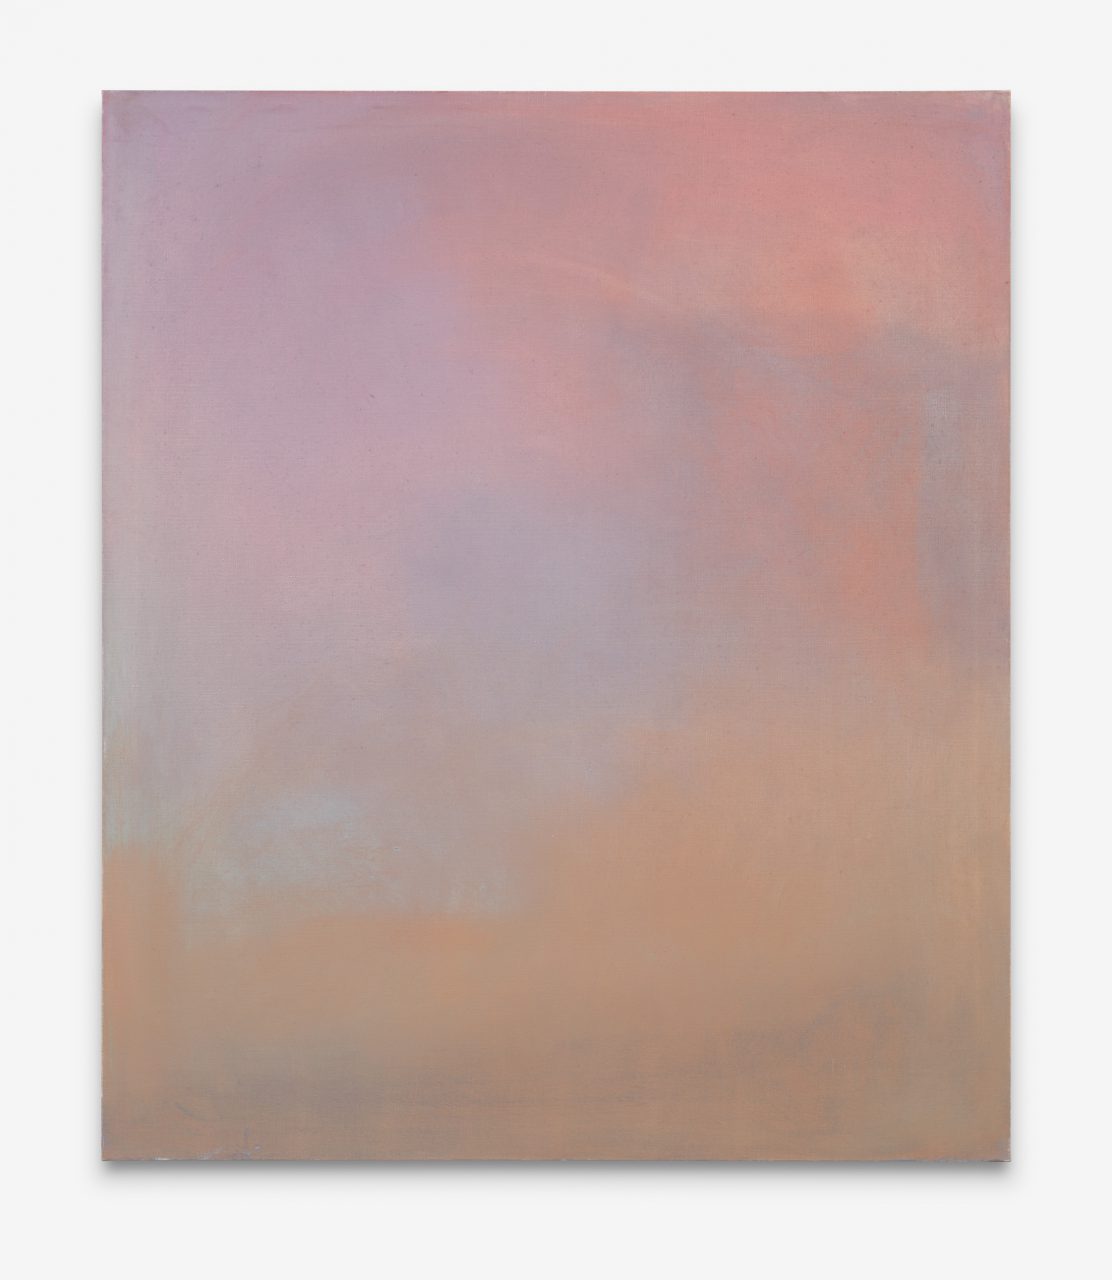 Prehisotric Sunset SI 2019 135x115cm oil on cavnas